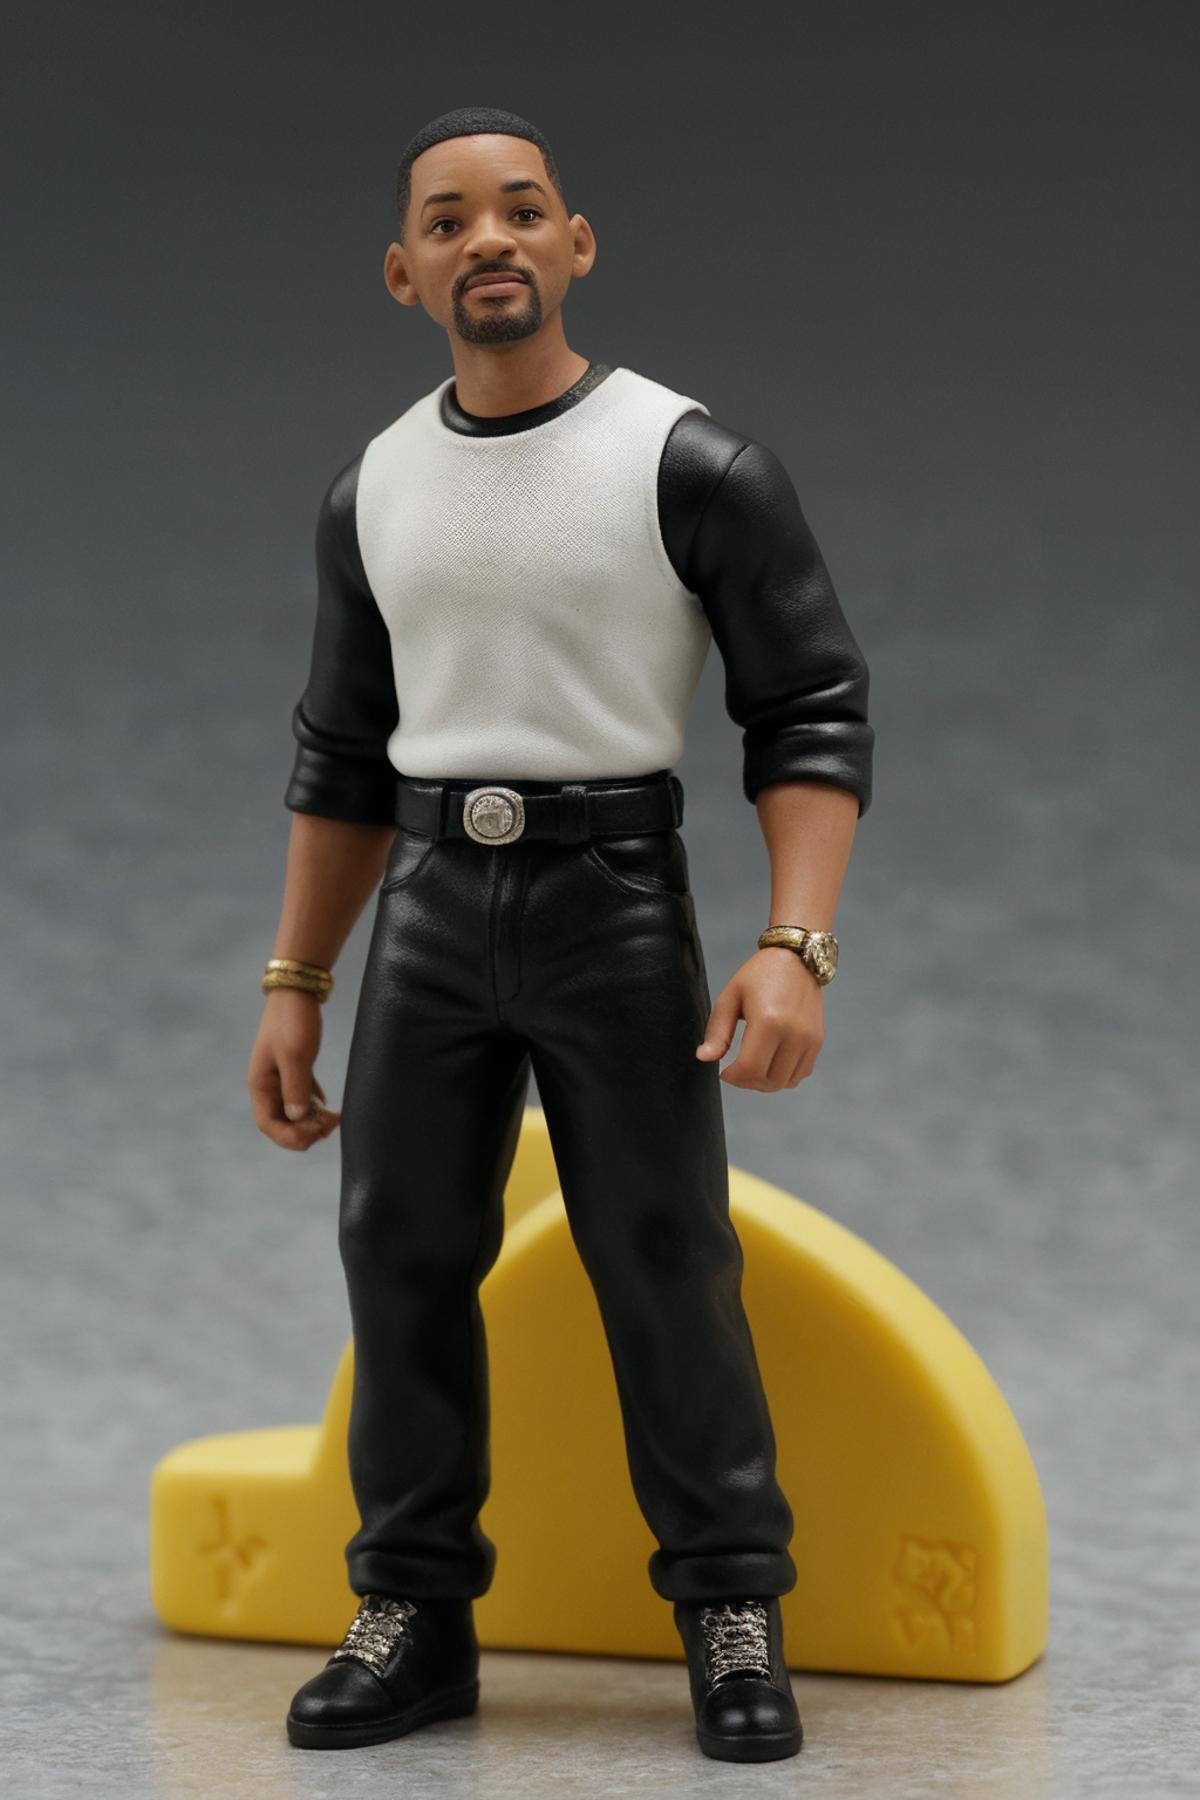 A black and white action figure with a gold watch.